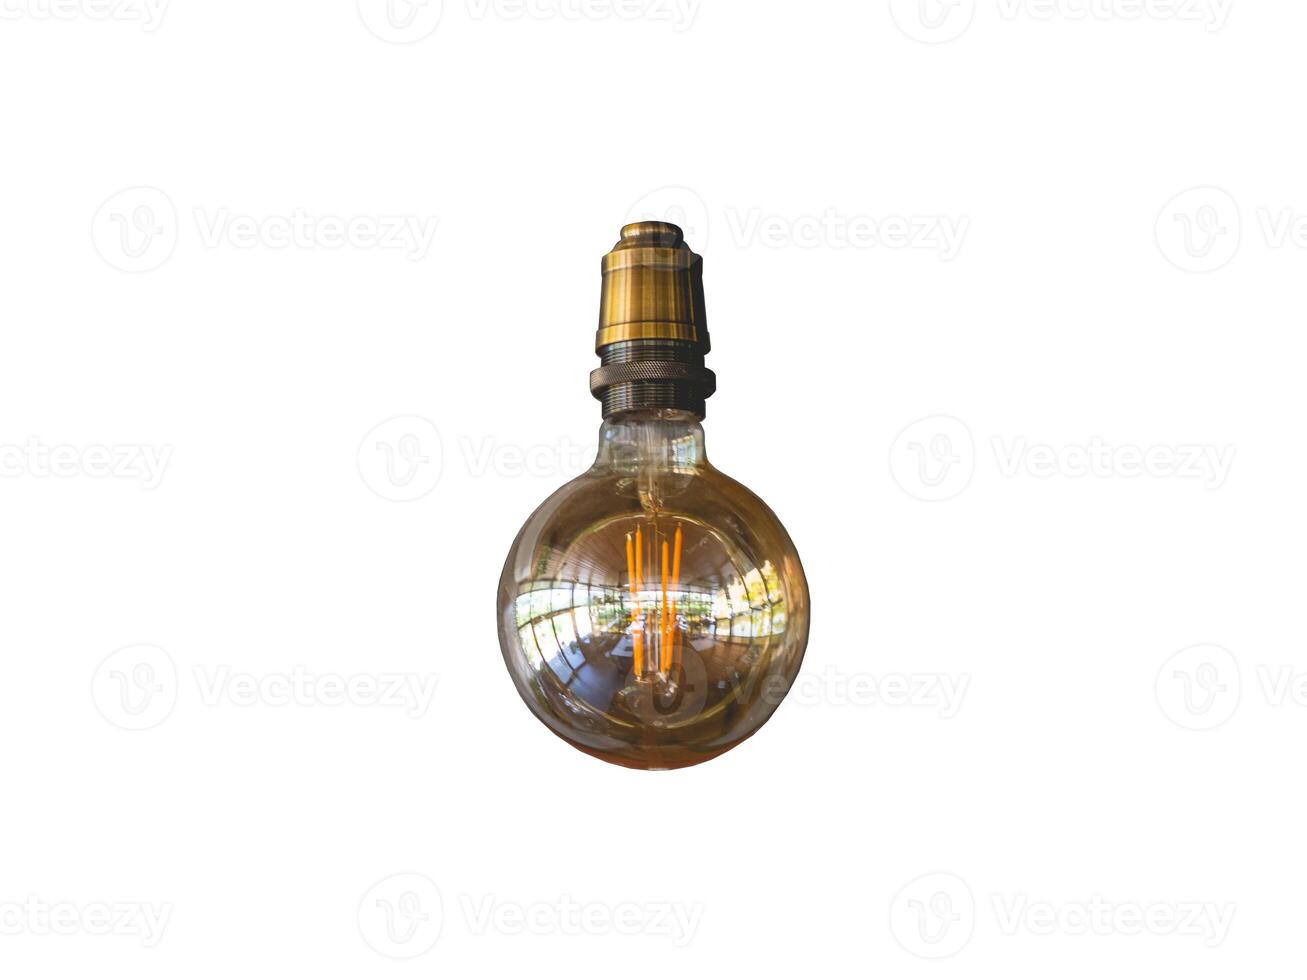 Isolated antique vase on white background with objects like bottle, glass, and lamp, depicting beauty photo